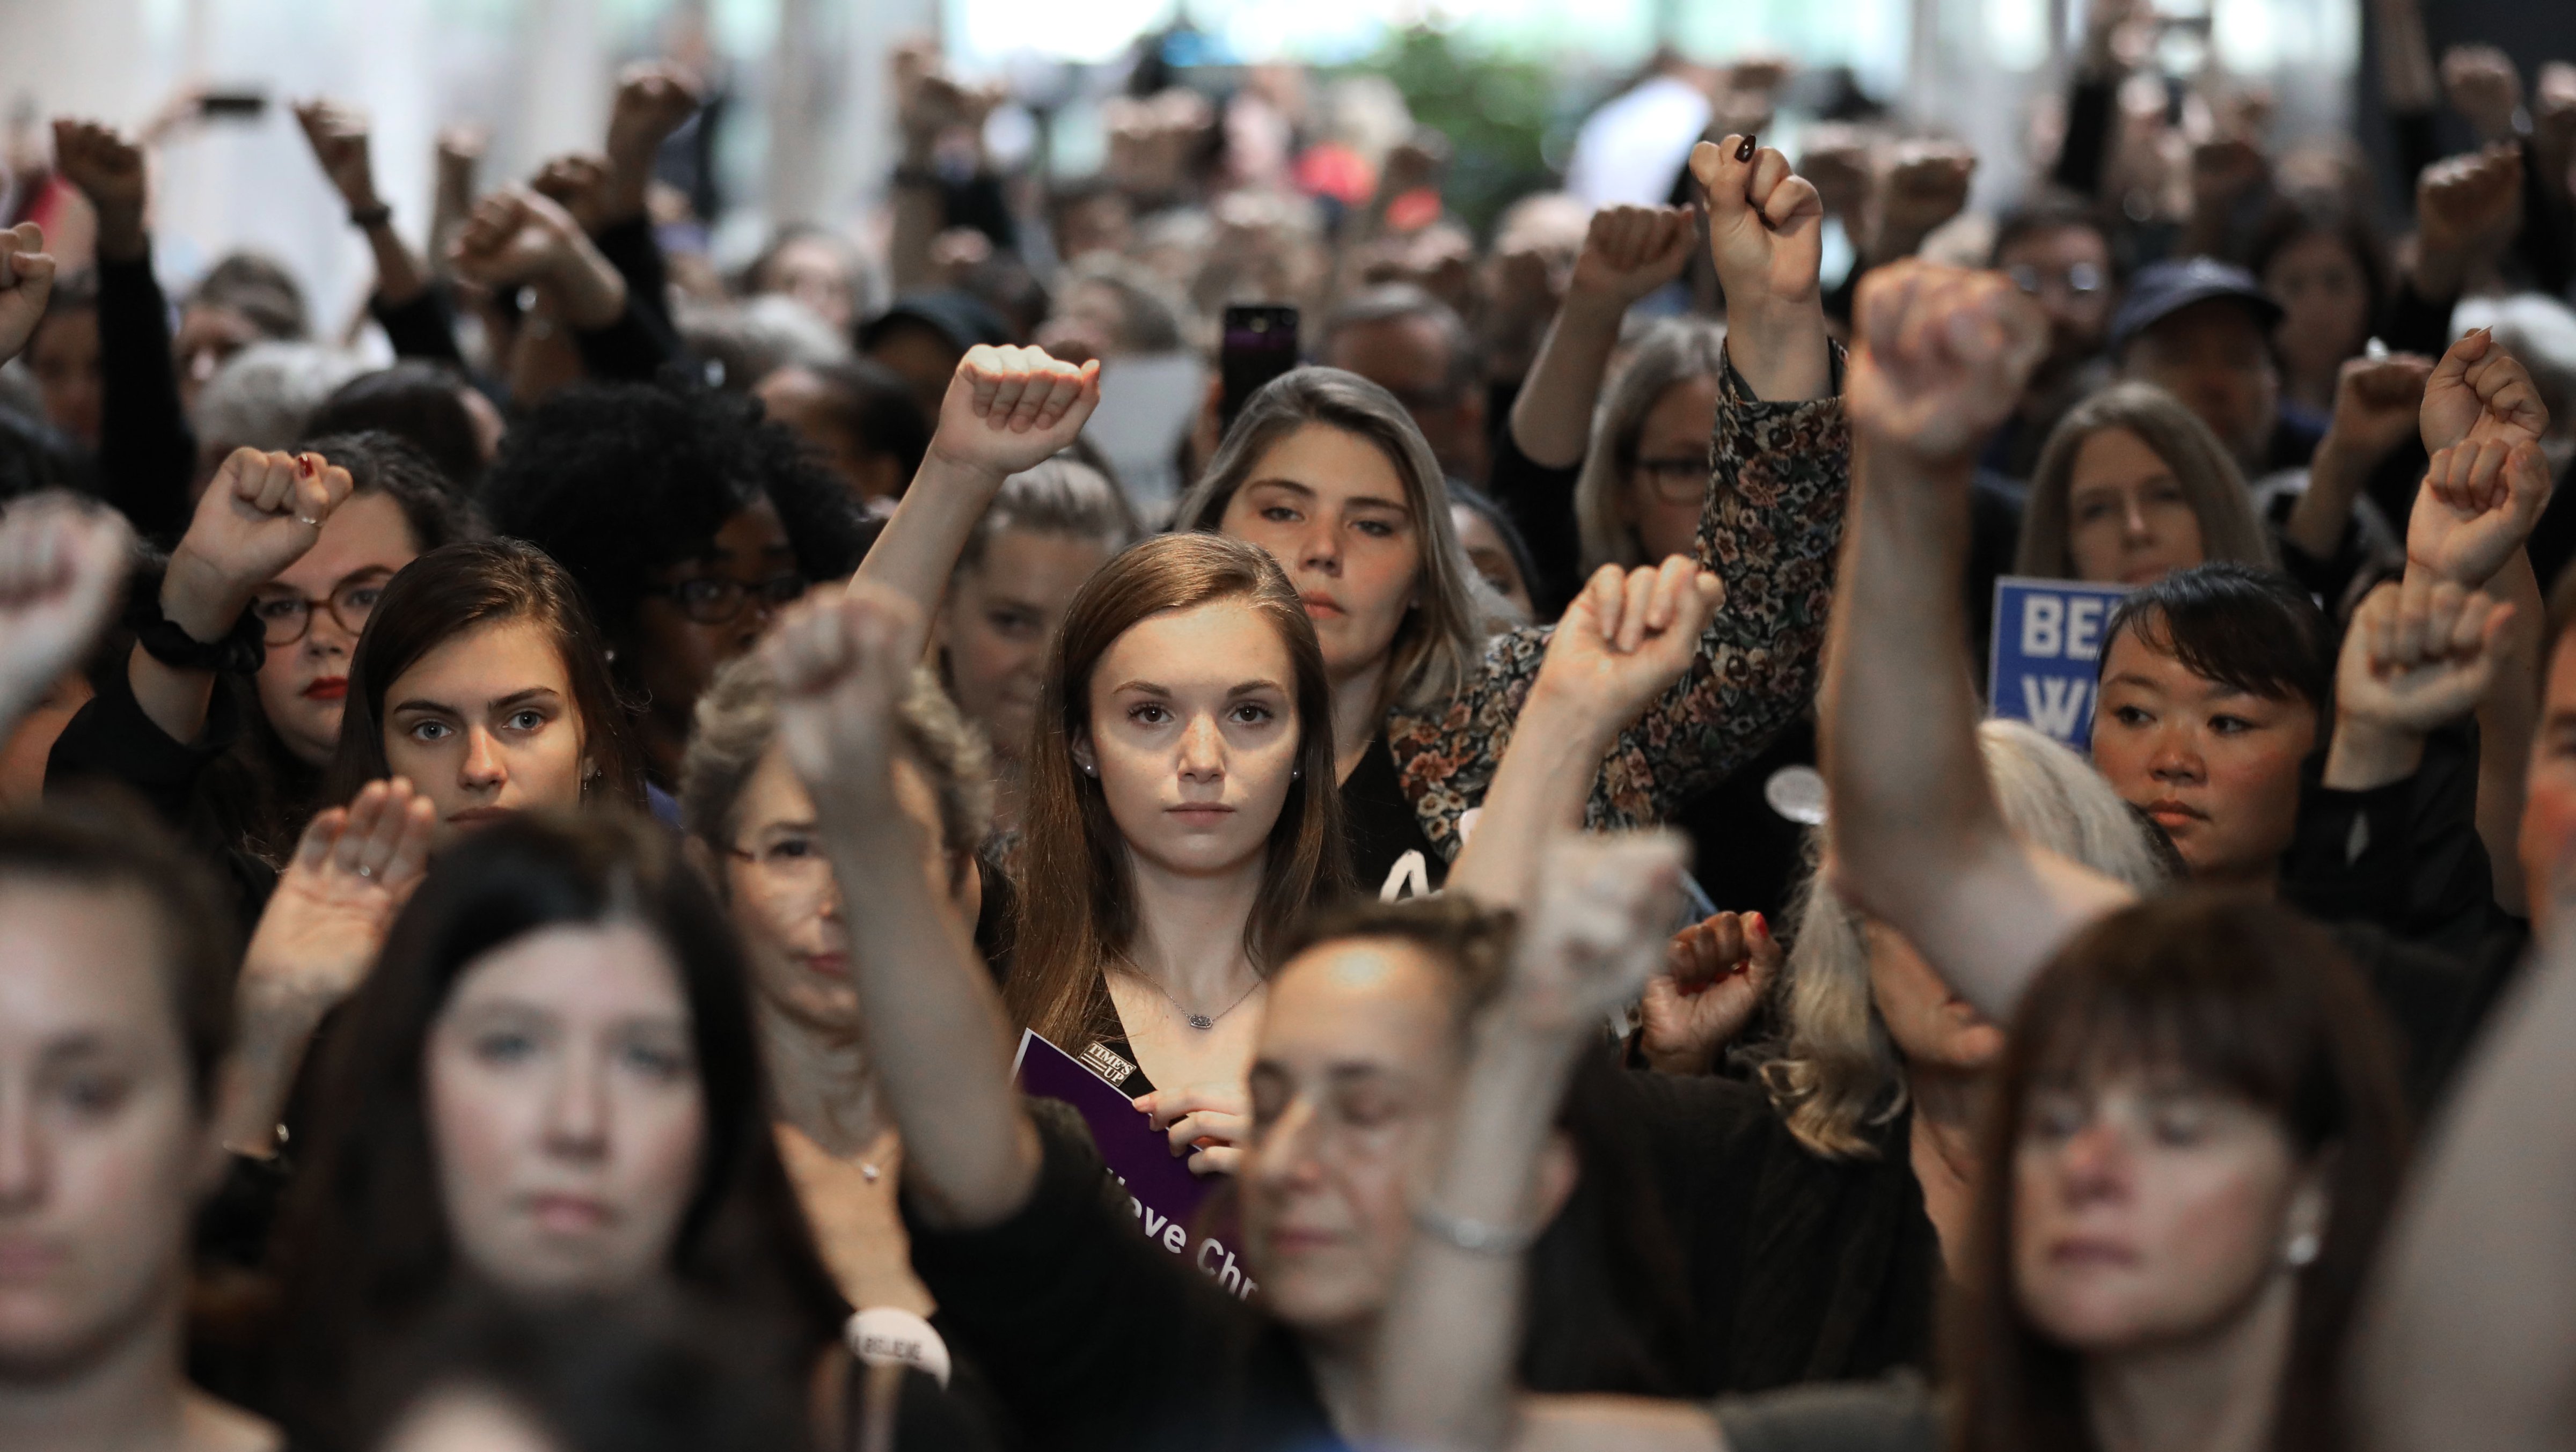 Hundreds of protesters rally in the Hart Senate Office Building while demonstrating against the confirmation of Supreme Court nominee Judge Brett Kavanaugh on Capitol Hill September 24, 2018 in Washington, DC. (Chip Somodevilla—Getty Images)